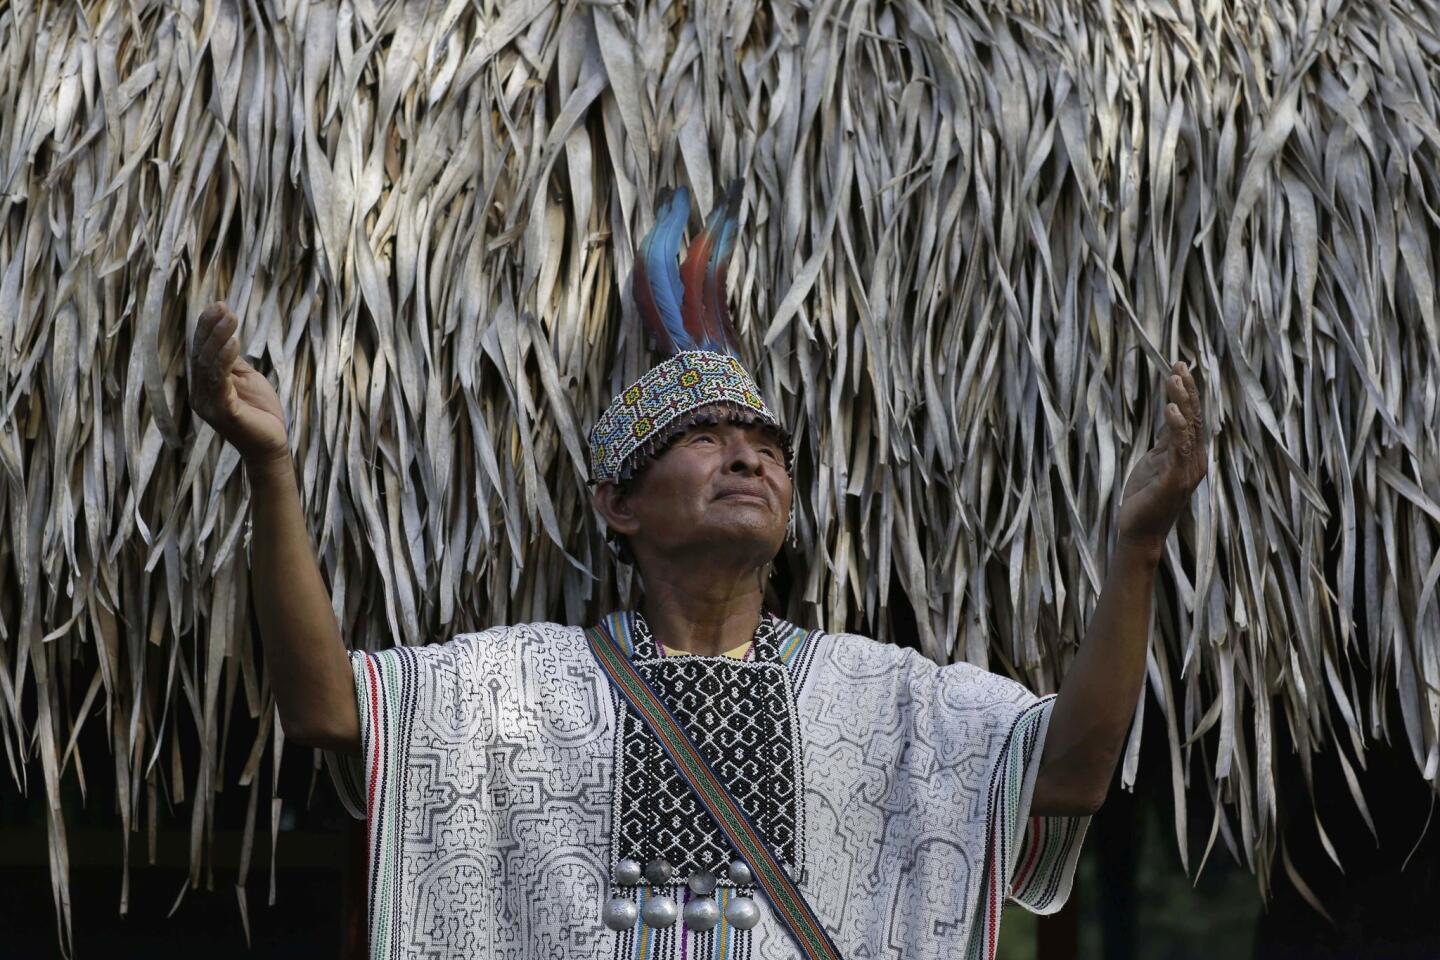 In this May 5, 2018 photo, Shaman Pablo Flores raises his hands to the sky before the beginning of an ayahuasca session, in Nuevo Egipto, a remote village in the jungles of Peru. Flores performs ayahuasca sessions for tourists. He does not charge for his services but does accept donations. (AP Photo/Martin Mejia)